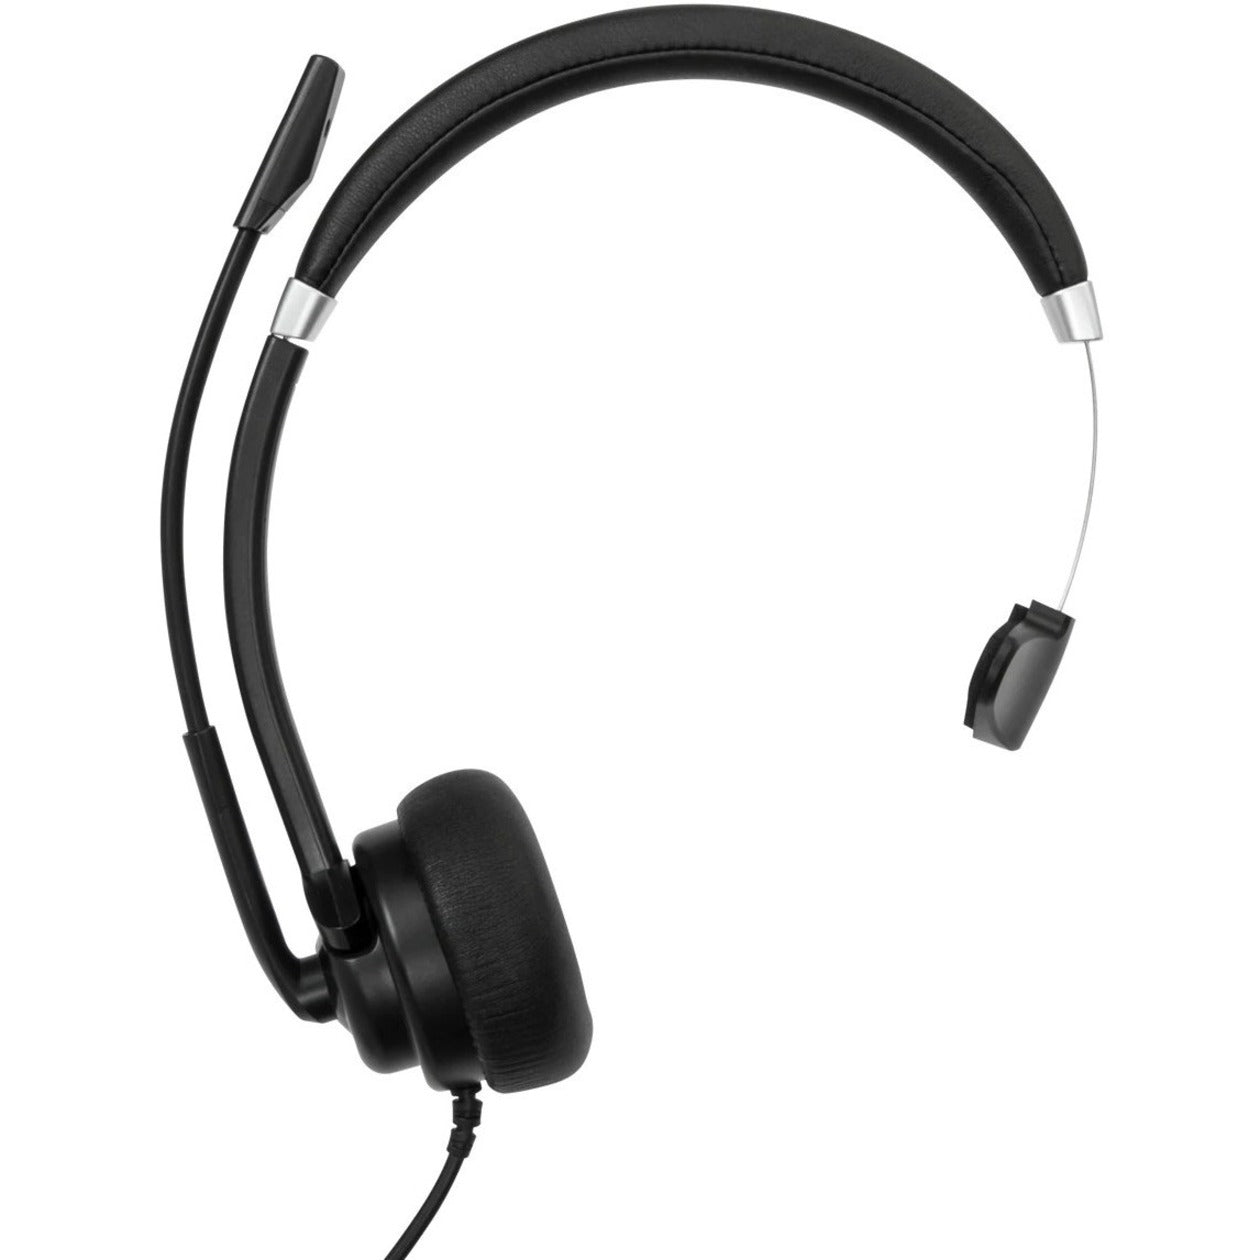 Targus AEH101TT Wired Mono Headset, Lightweight On-ear Headset with Rotating Microphone, USB Type A Interface